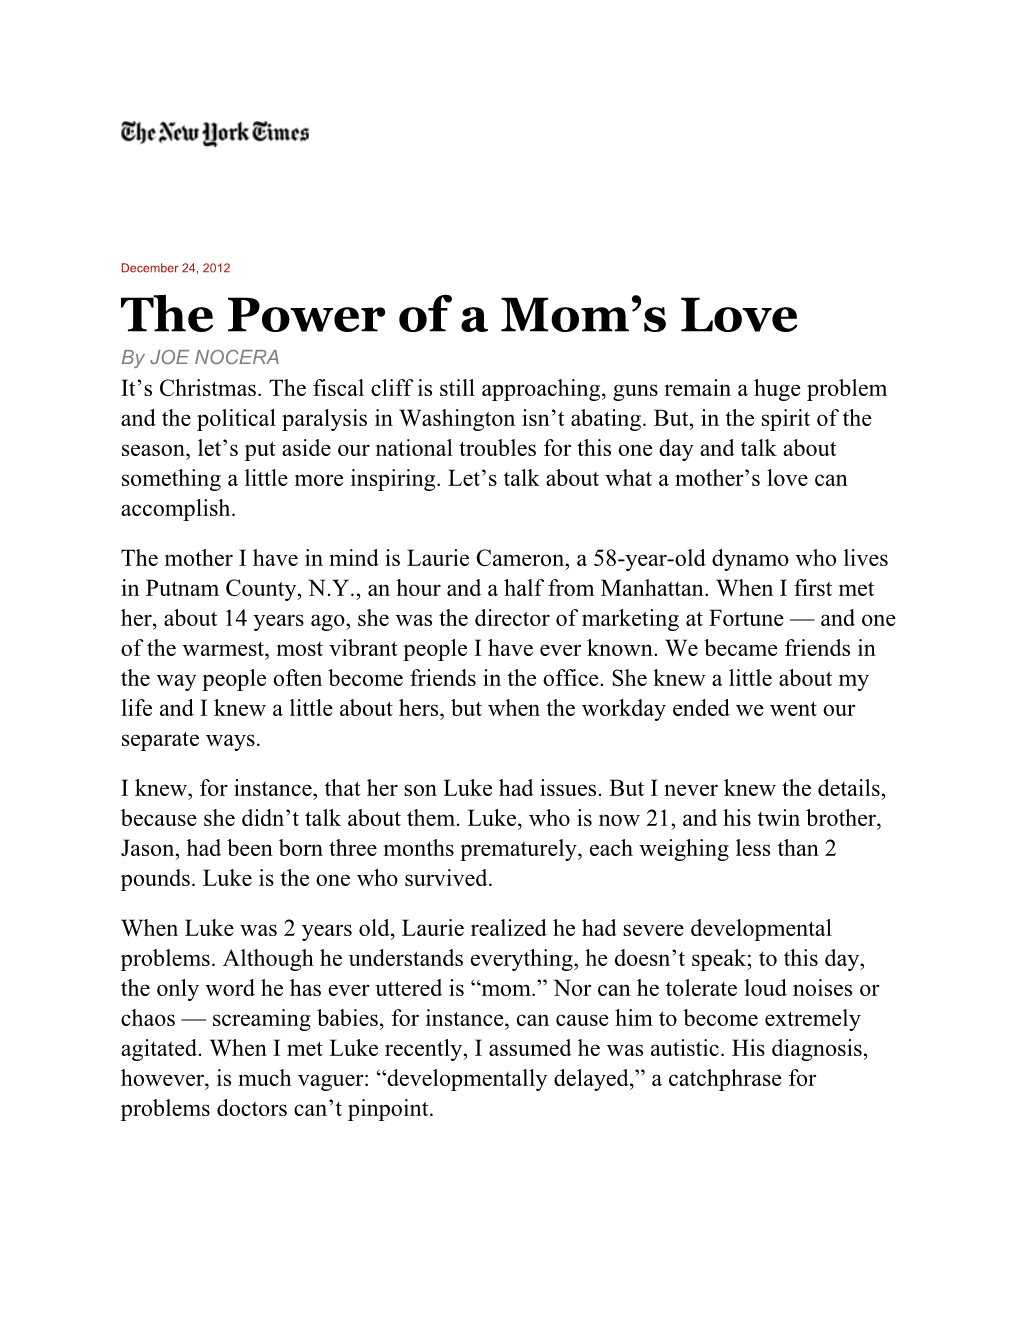 The Power of a Mom S Love